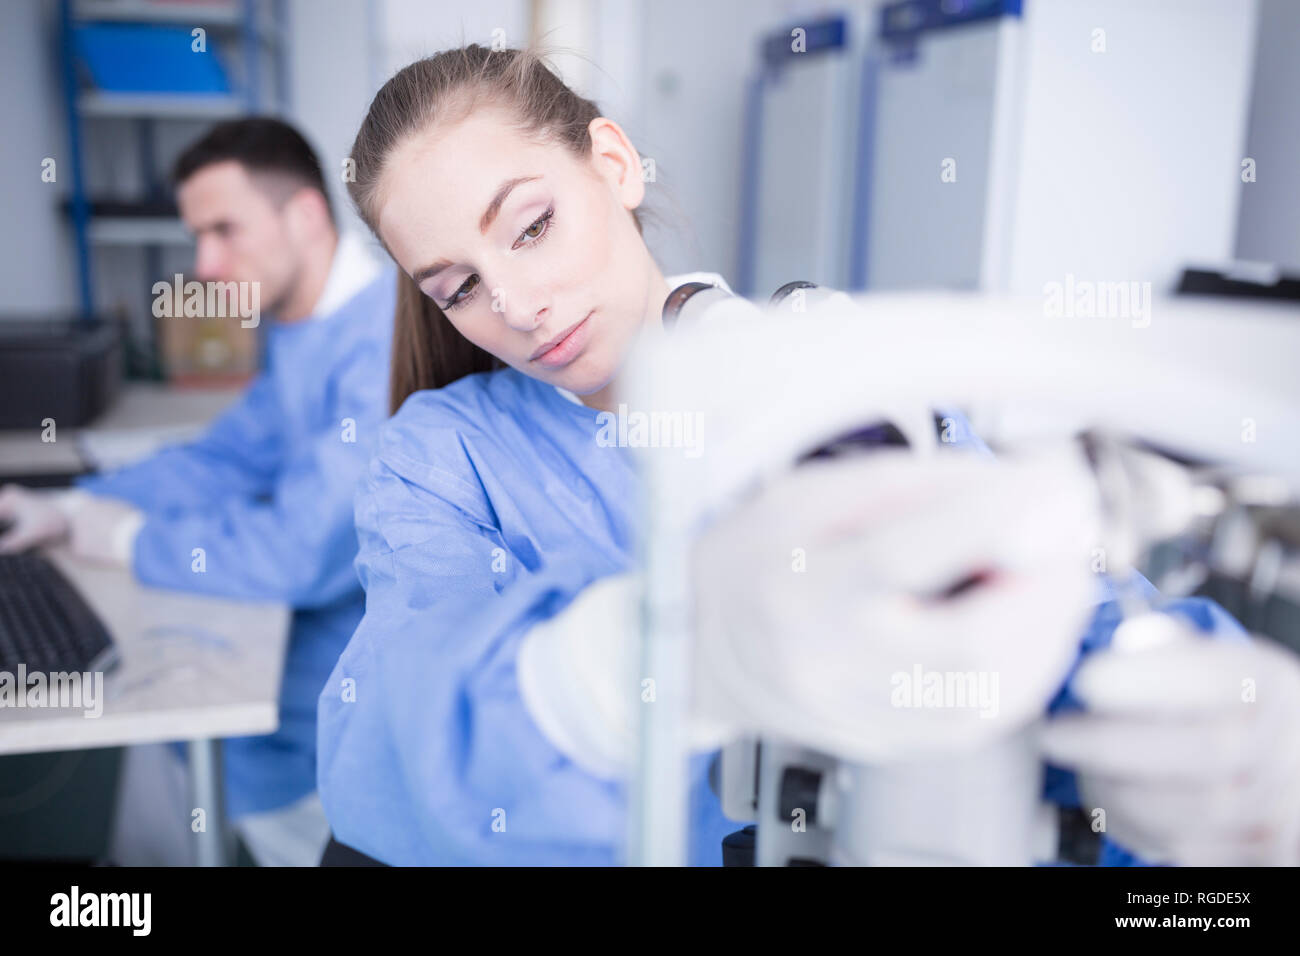 Lab technician working in lab Stock Photo